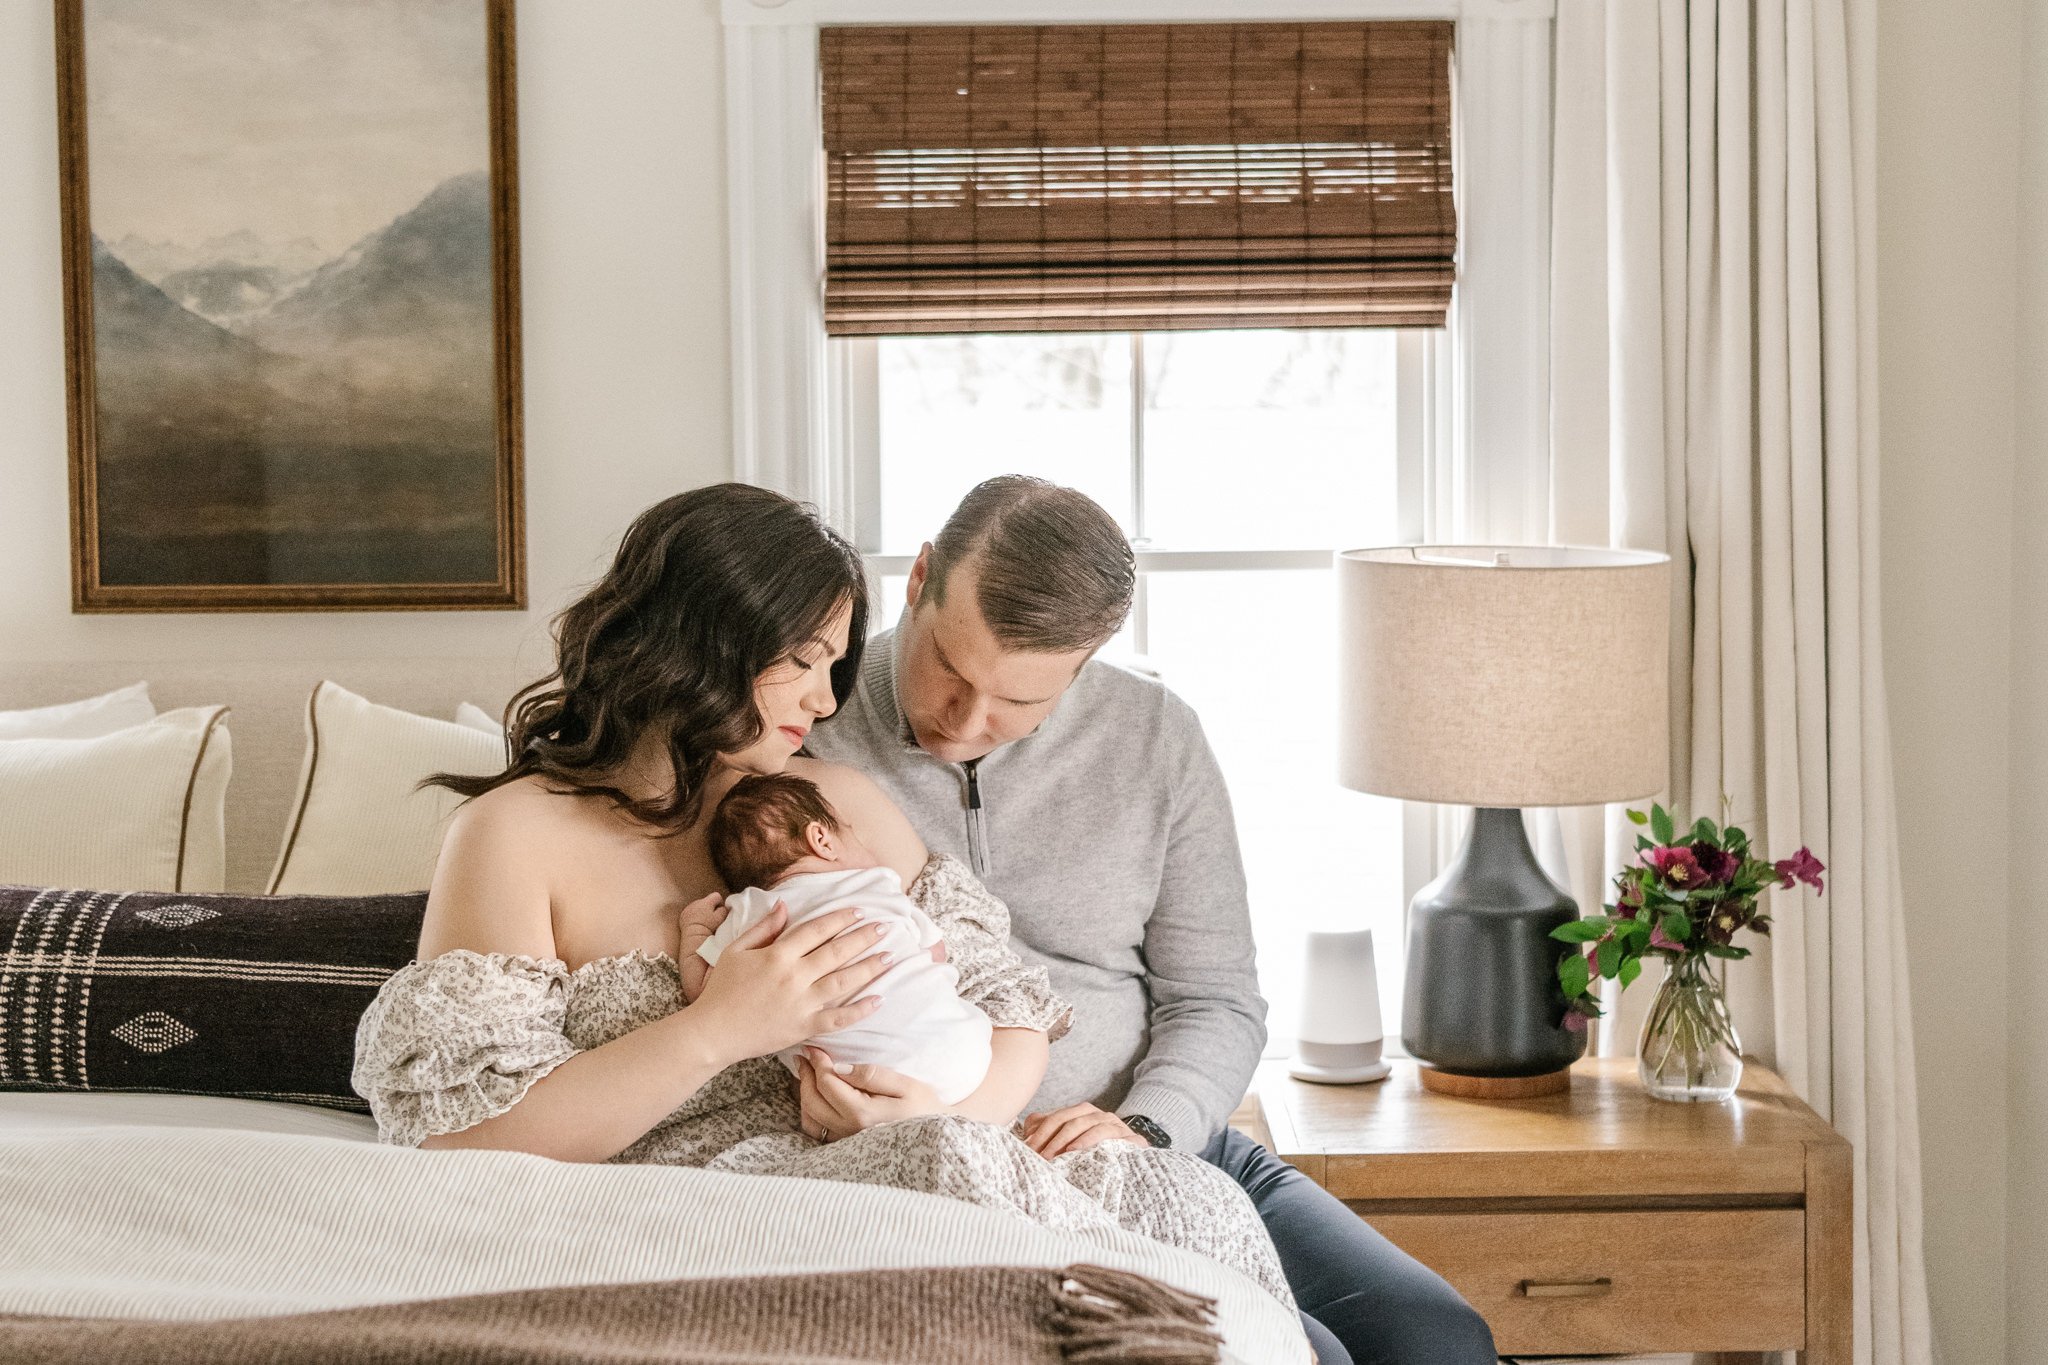  A timeless portrait of a new family of three sitting on their bed in New Jersey by Nicole Hawkins Photography. romantic timeless family portraits #NicoleHawkinsPhotography #NicoleHawkinsNewborns #MontclairNewbornPhotographer #InHomeNewborns #NJNewbo